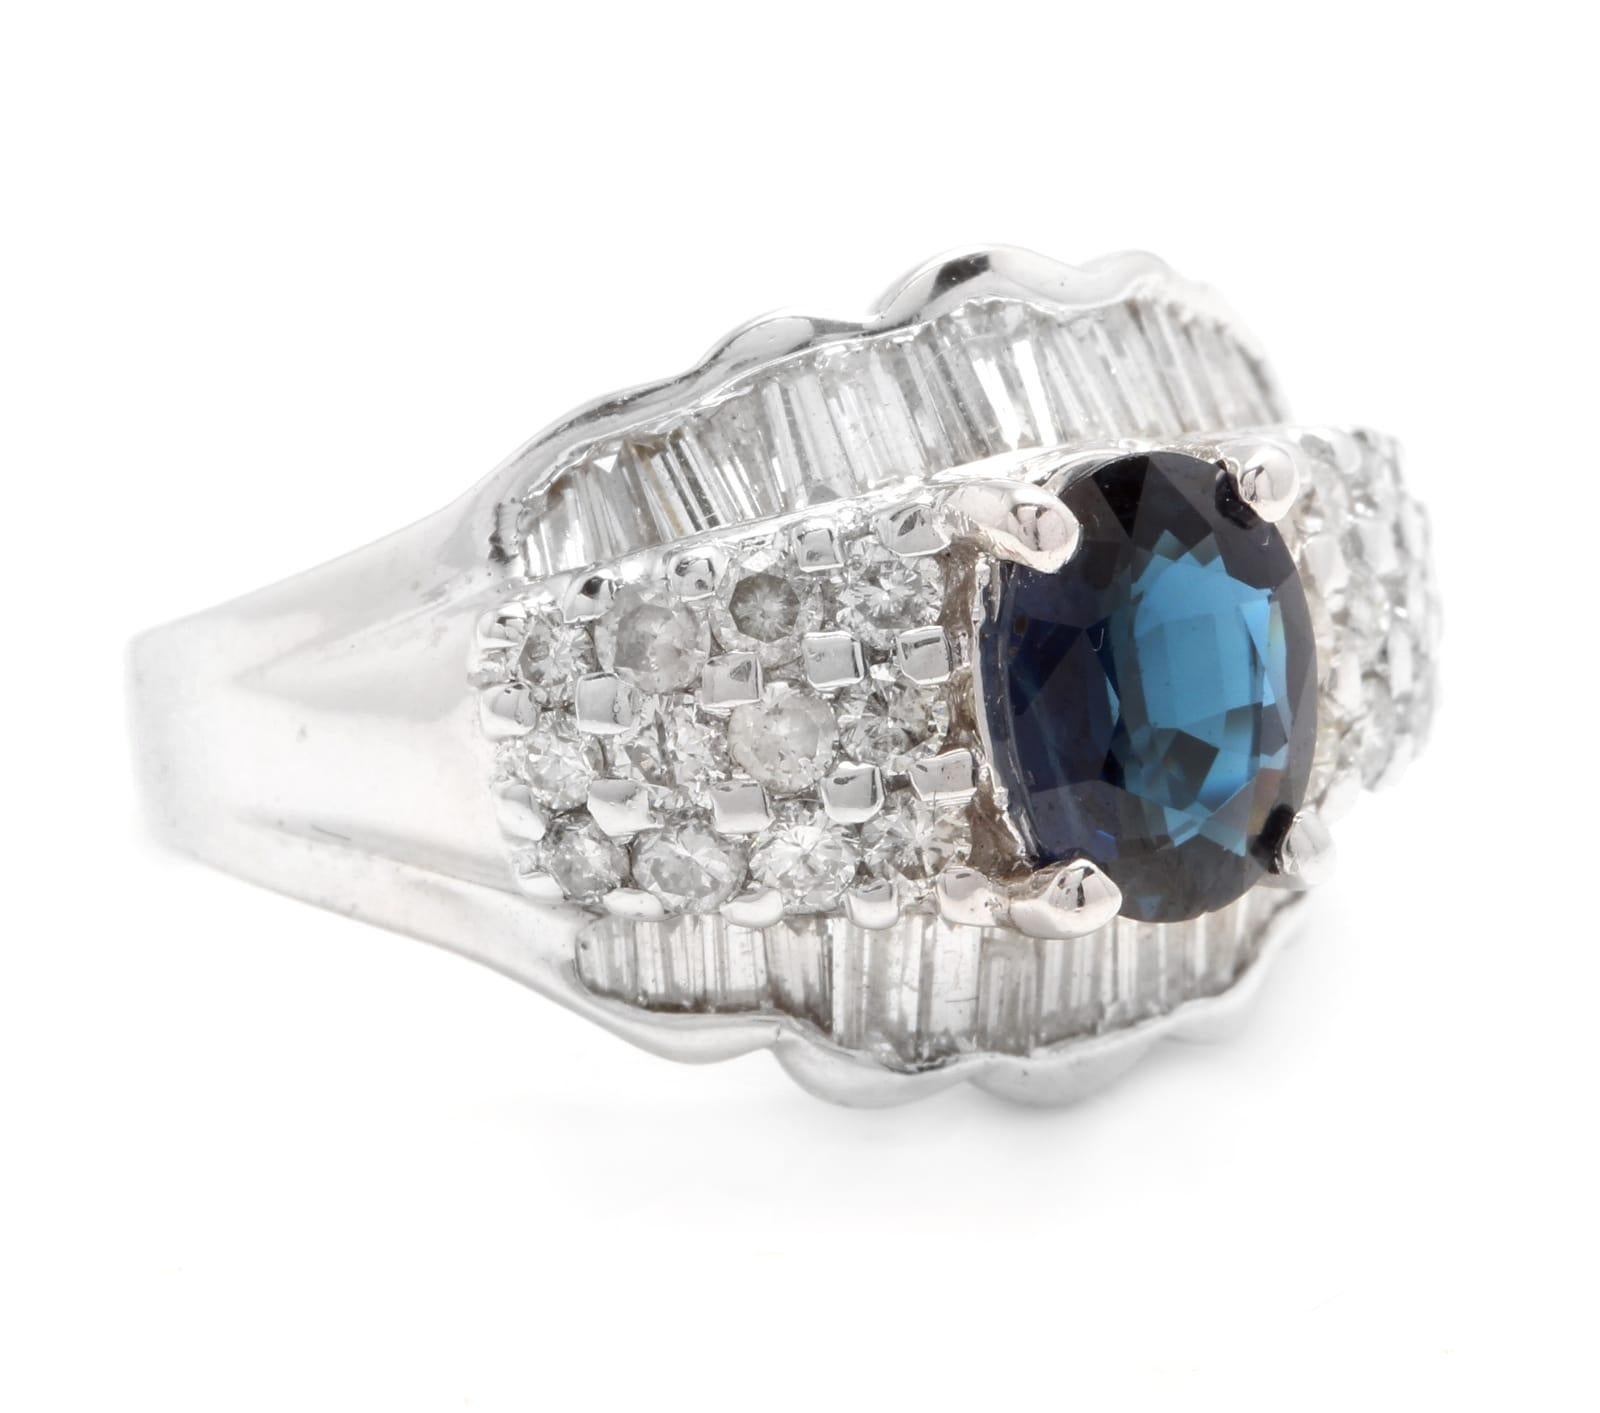 3.46 Carats Exquisite Natural Blue Sapphire and Diamond 18K Solid White Gold Ring

Stamped: 18K

Total Natural Blue Sapphire Weight is: Approx. 1.80 Carats

Sapphire Measures: Approx. 8.00 x 6.00mm

Natural Round & Baguette Diamonds Weight: Approx.